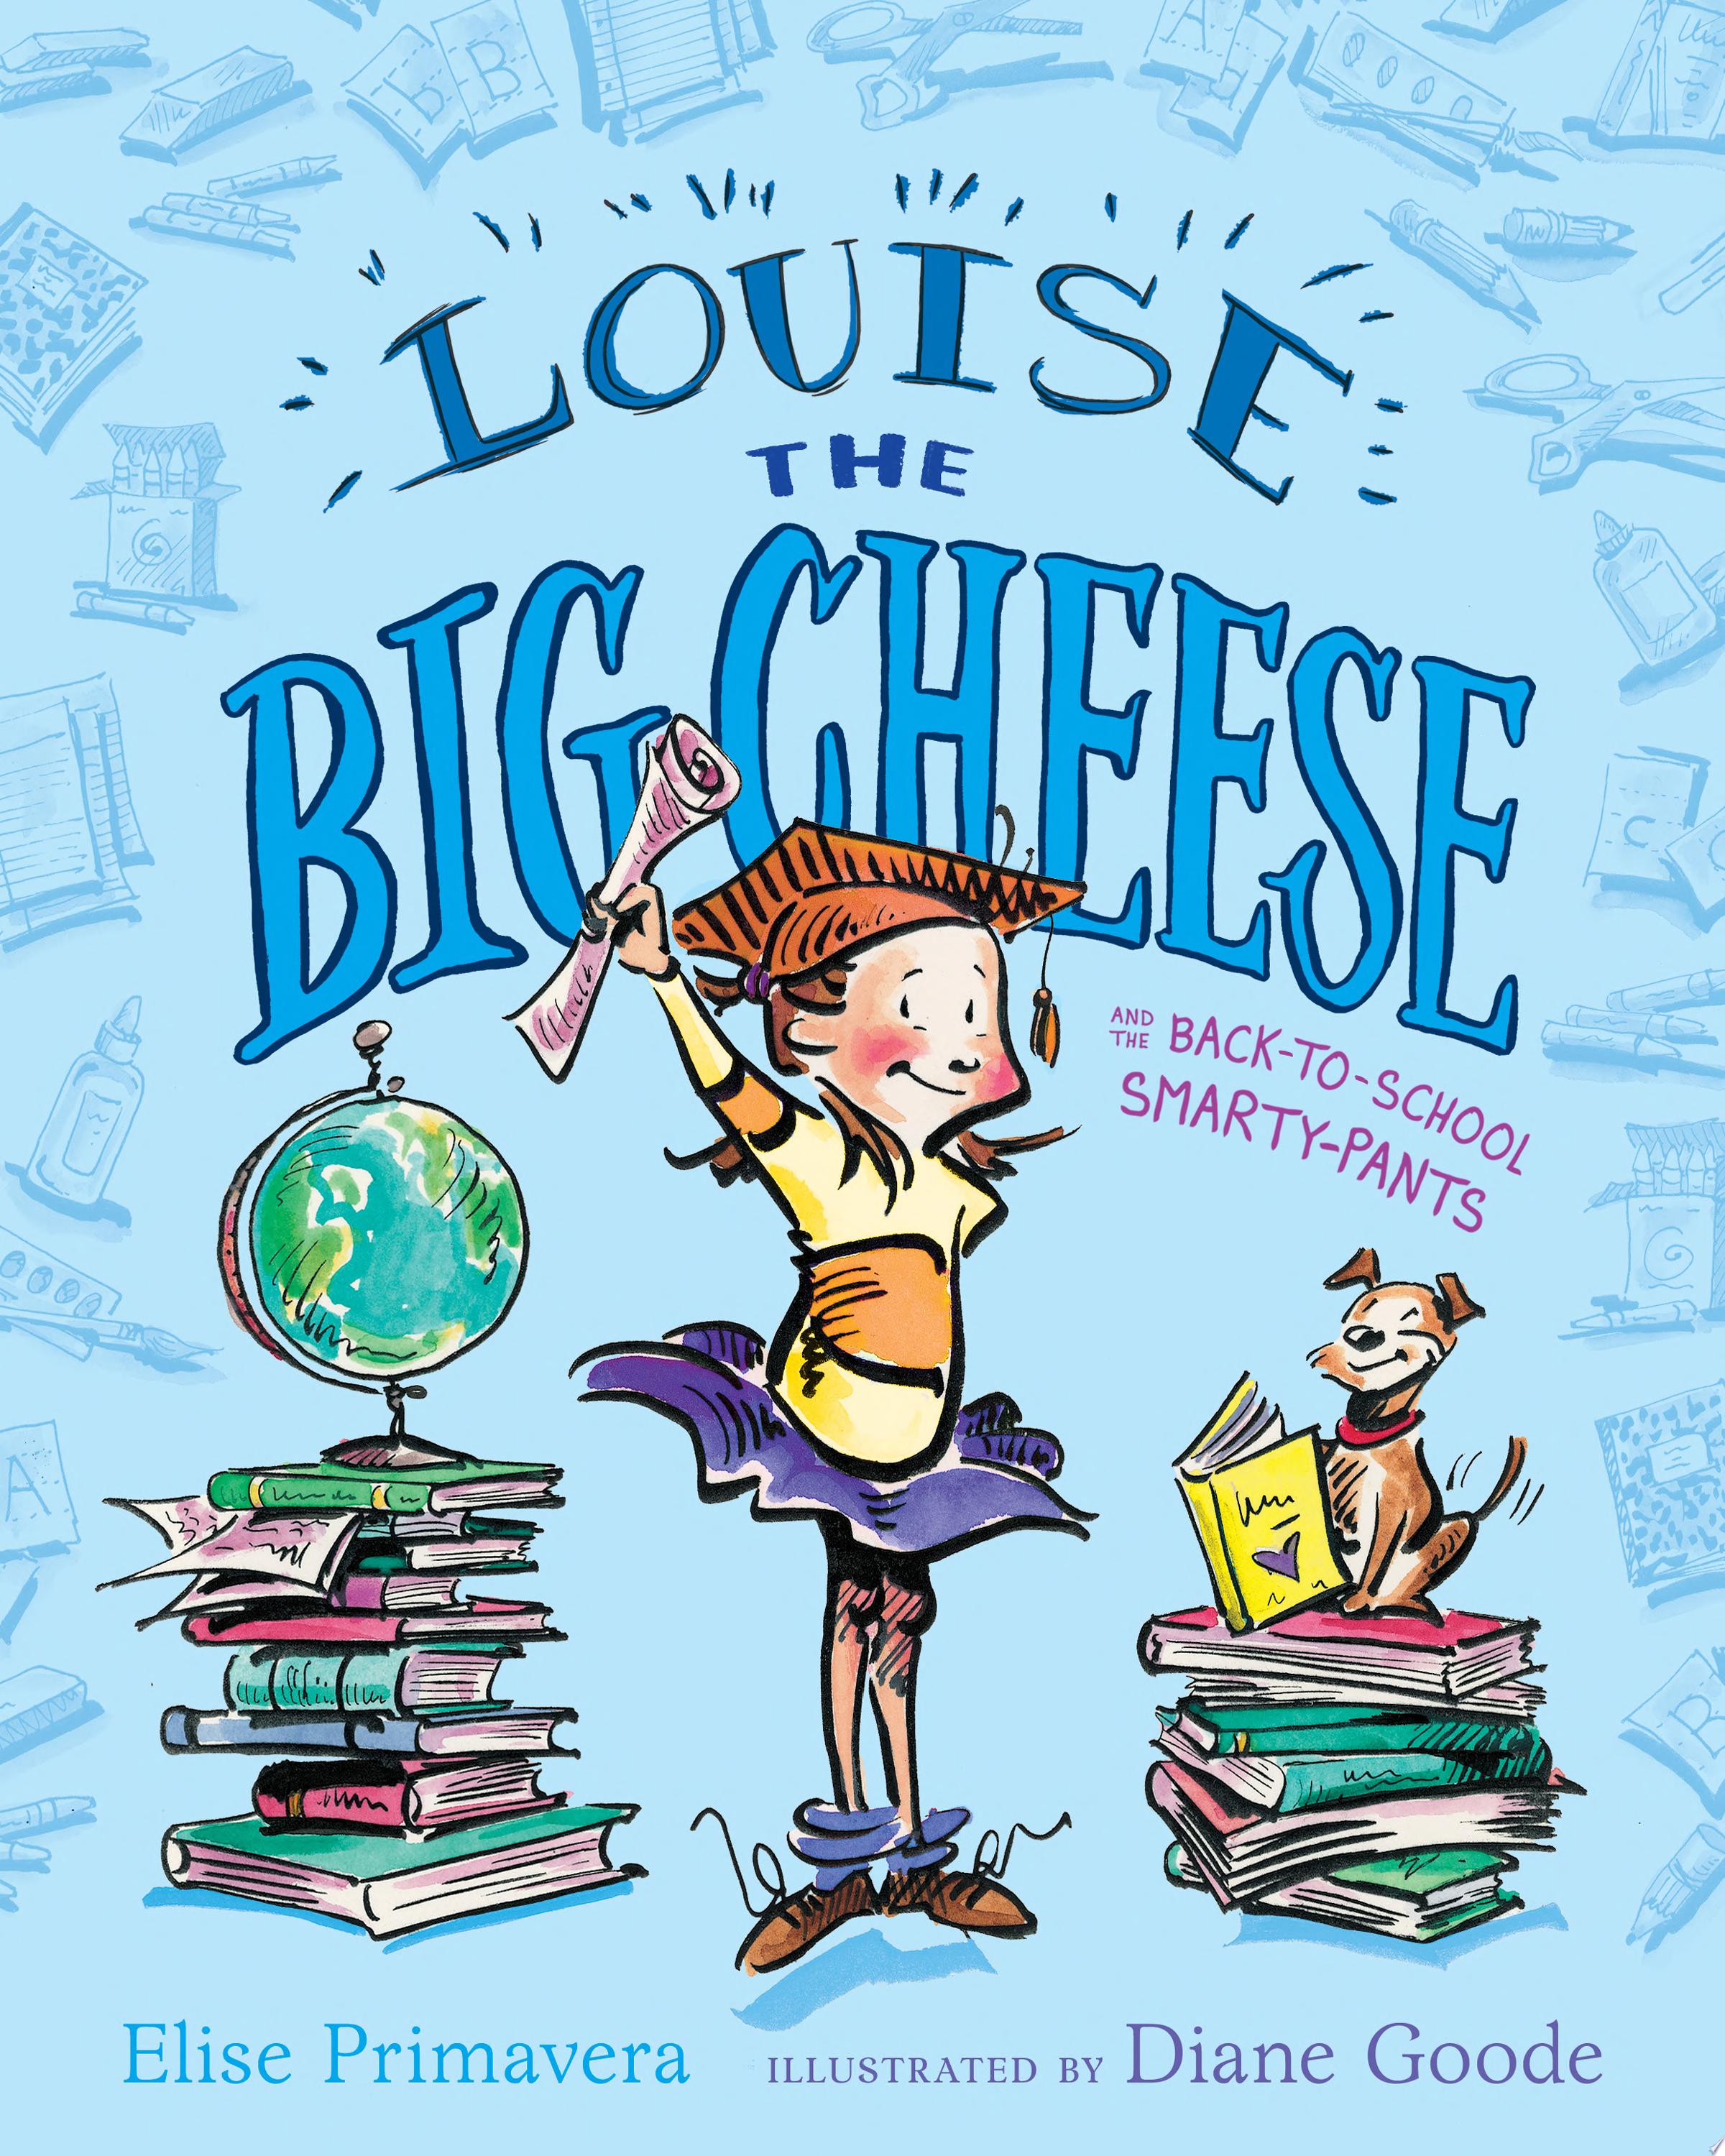 Image for "Louise the Big Cheese and the Back-to-School Smarty-Pants"